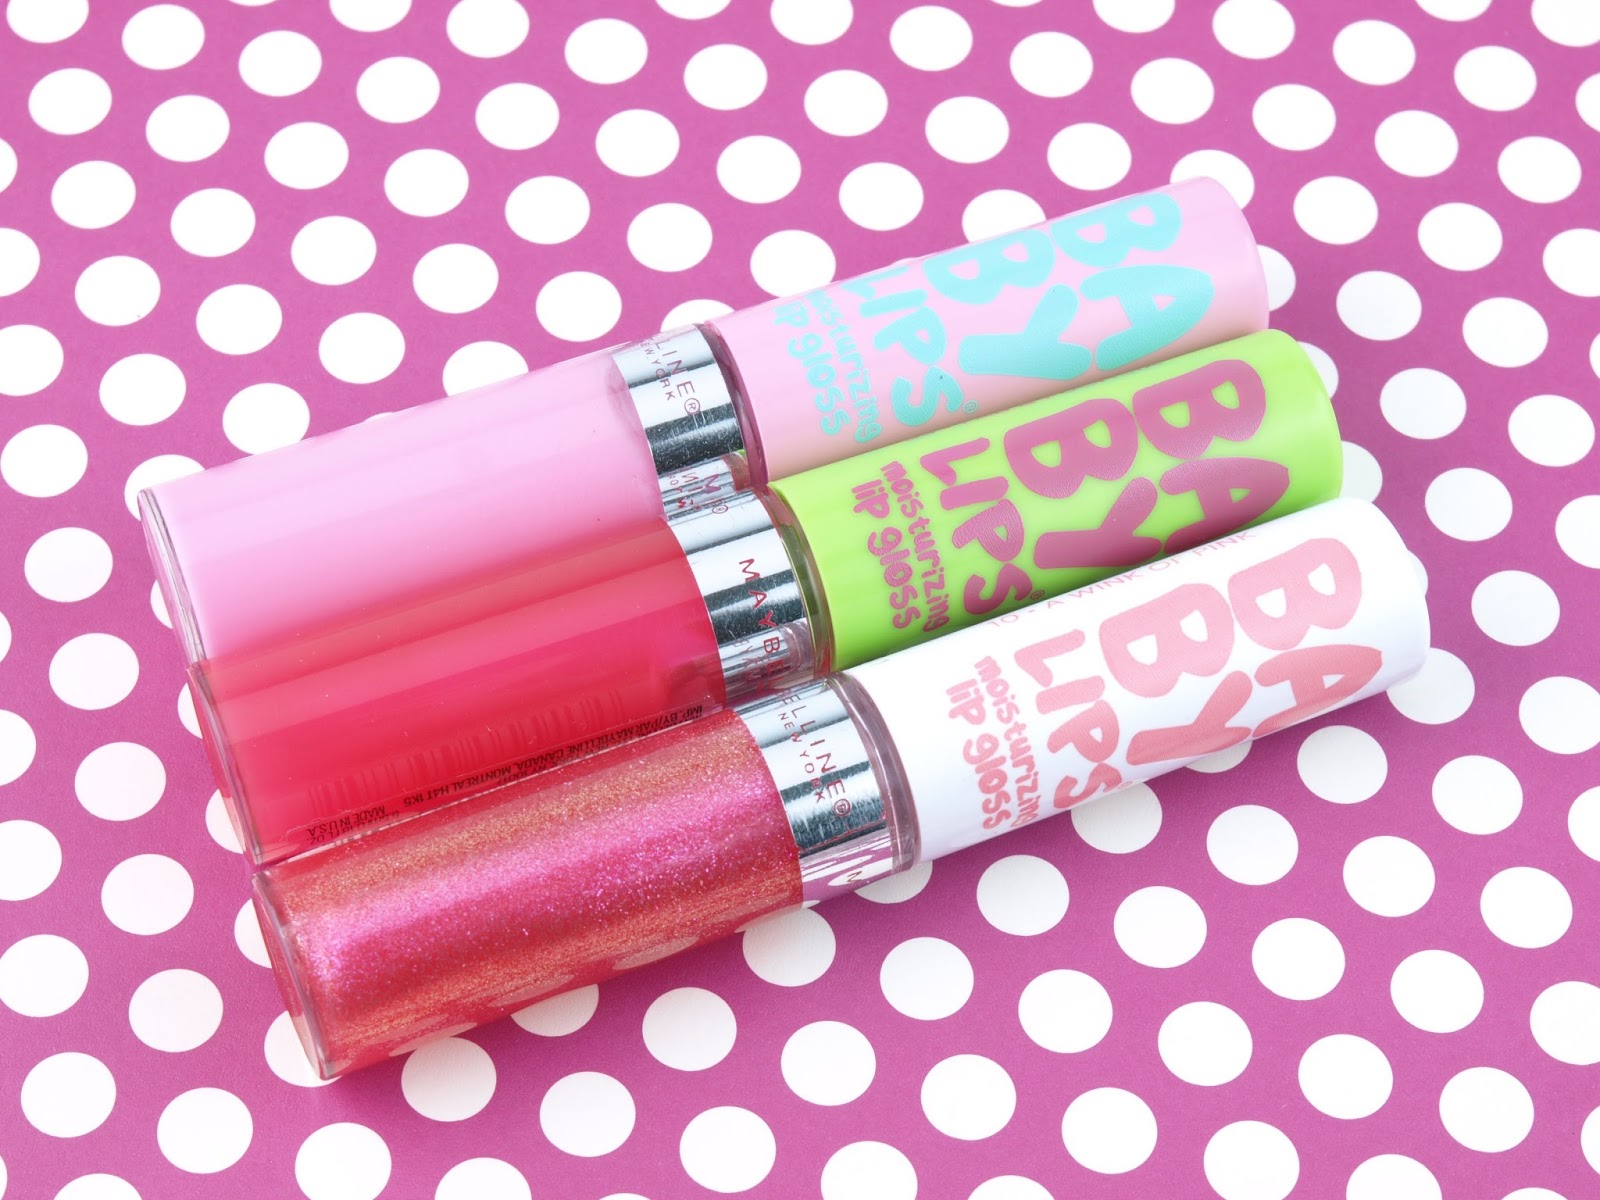 Maybelline Baby Lips Moisturizing Lip Gloss: Review and Swatches